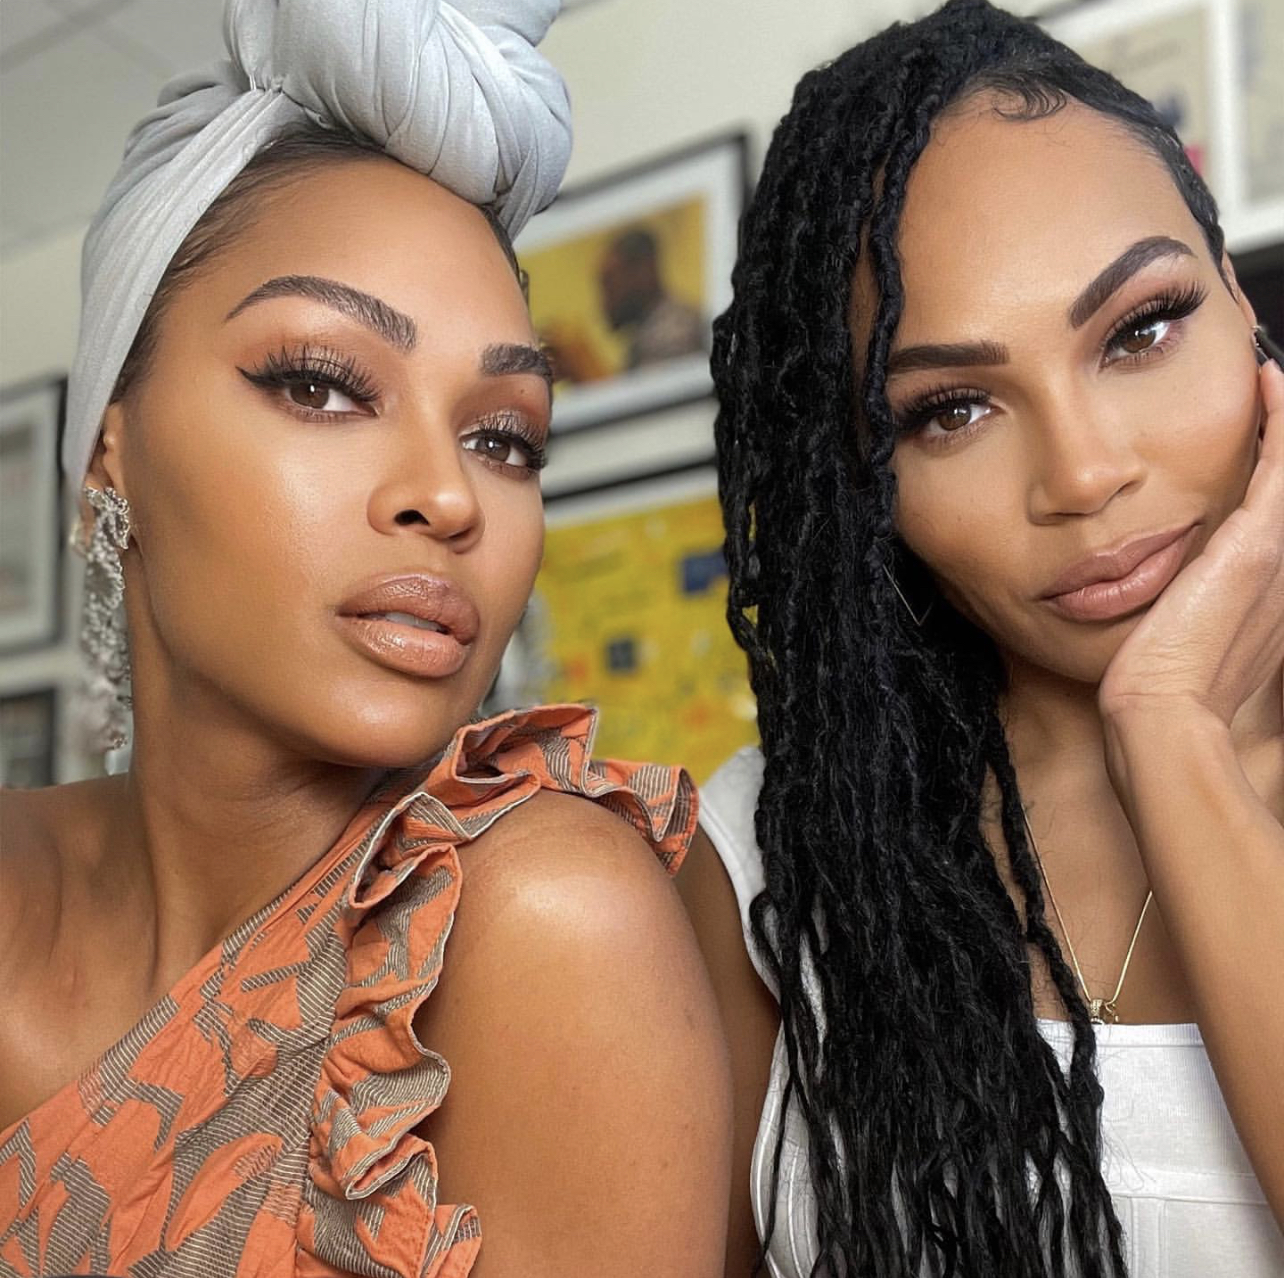 'Death Saved My Life' reallife sisters Meagan and La'Myia Good are